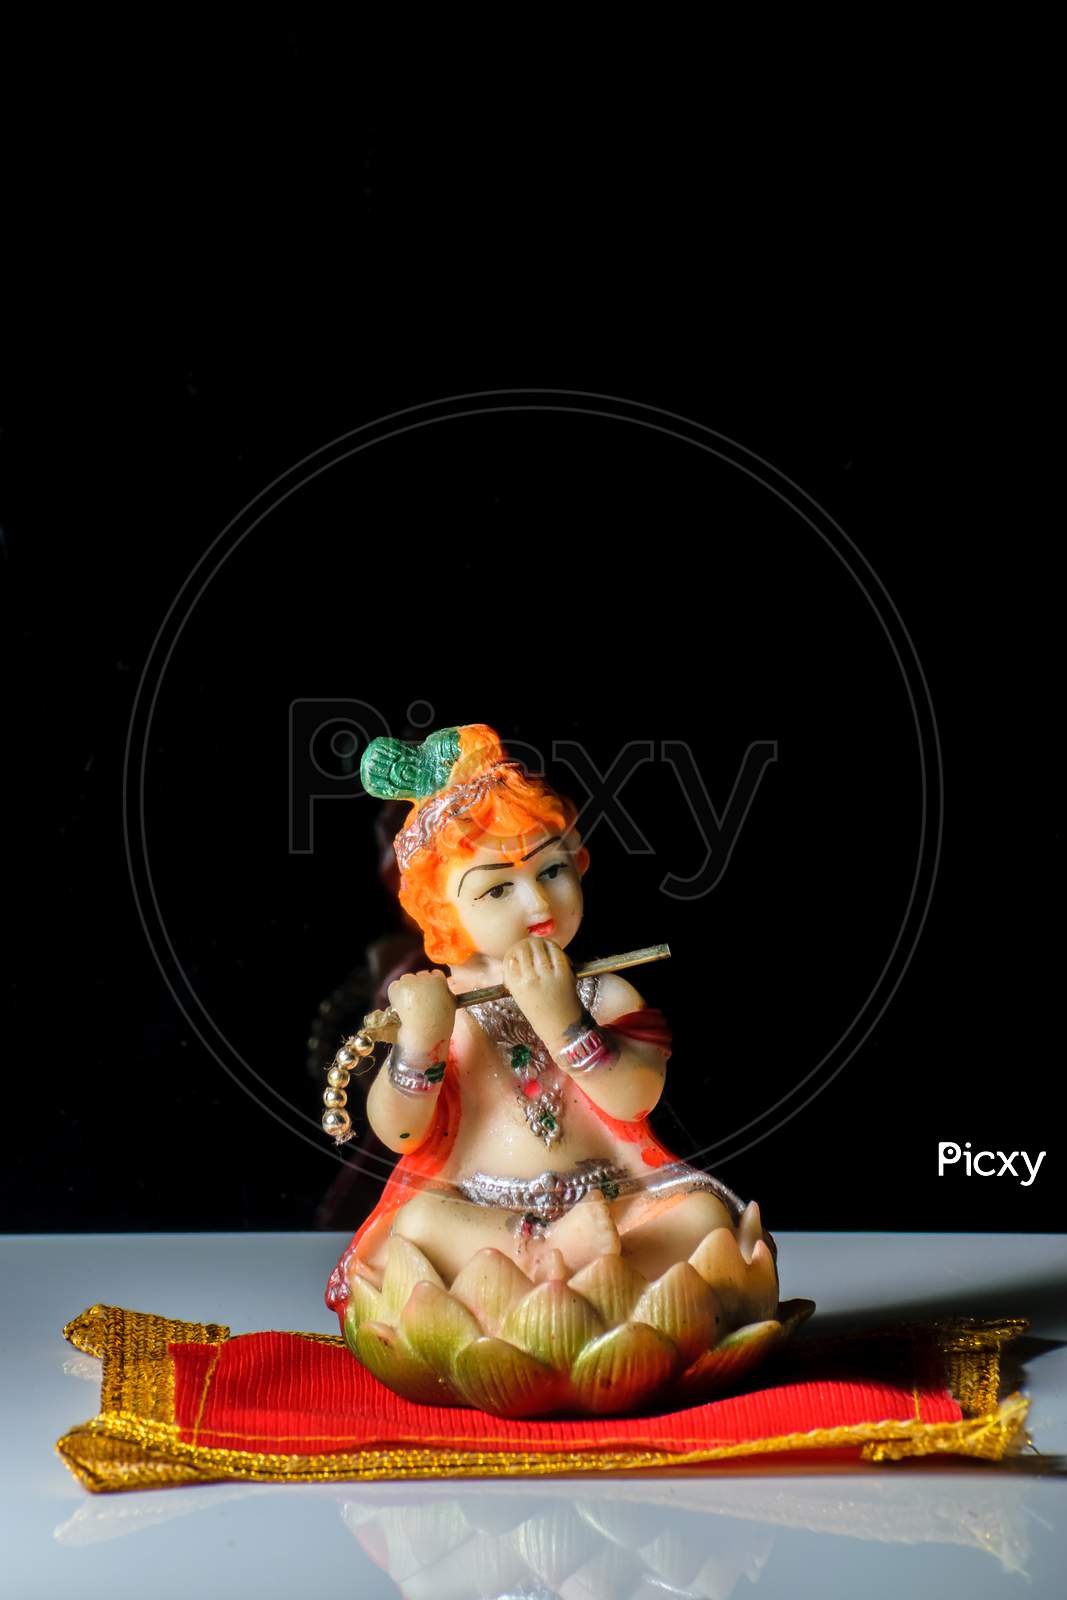 An Isolated Sculpture Of Indian God Lord Krishna Playing Flute Sitting On A Mat. On A Reflective White Table With A Dark Background.Portrait View